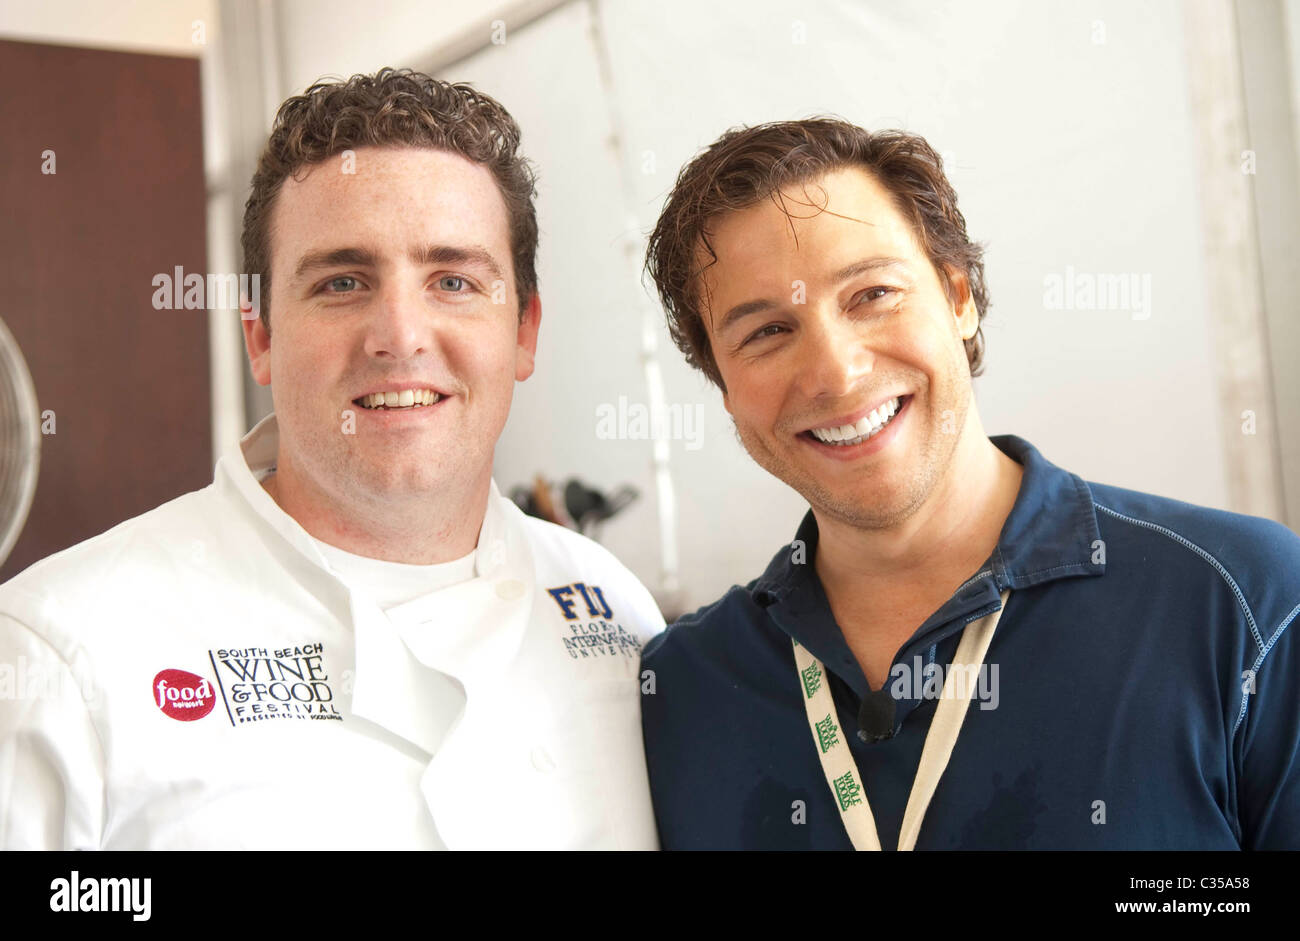 Cooking Personality Rocco DiSpirito, right, was assisted by FIU School of Hospitality student Kevin Purdy 2009 Wine and Food Stock Photo